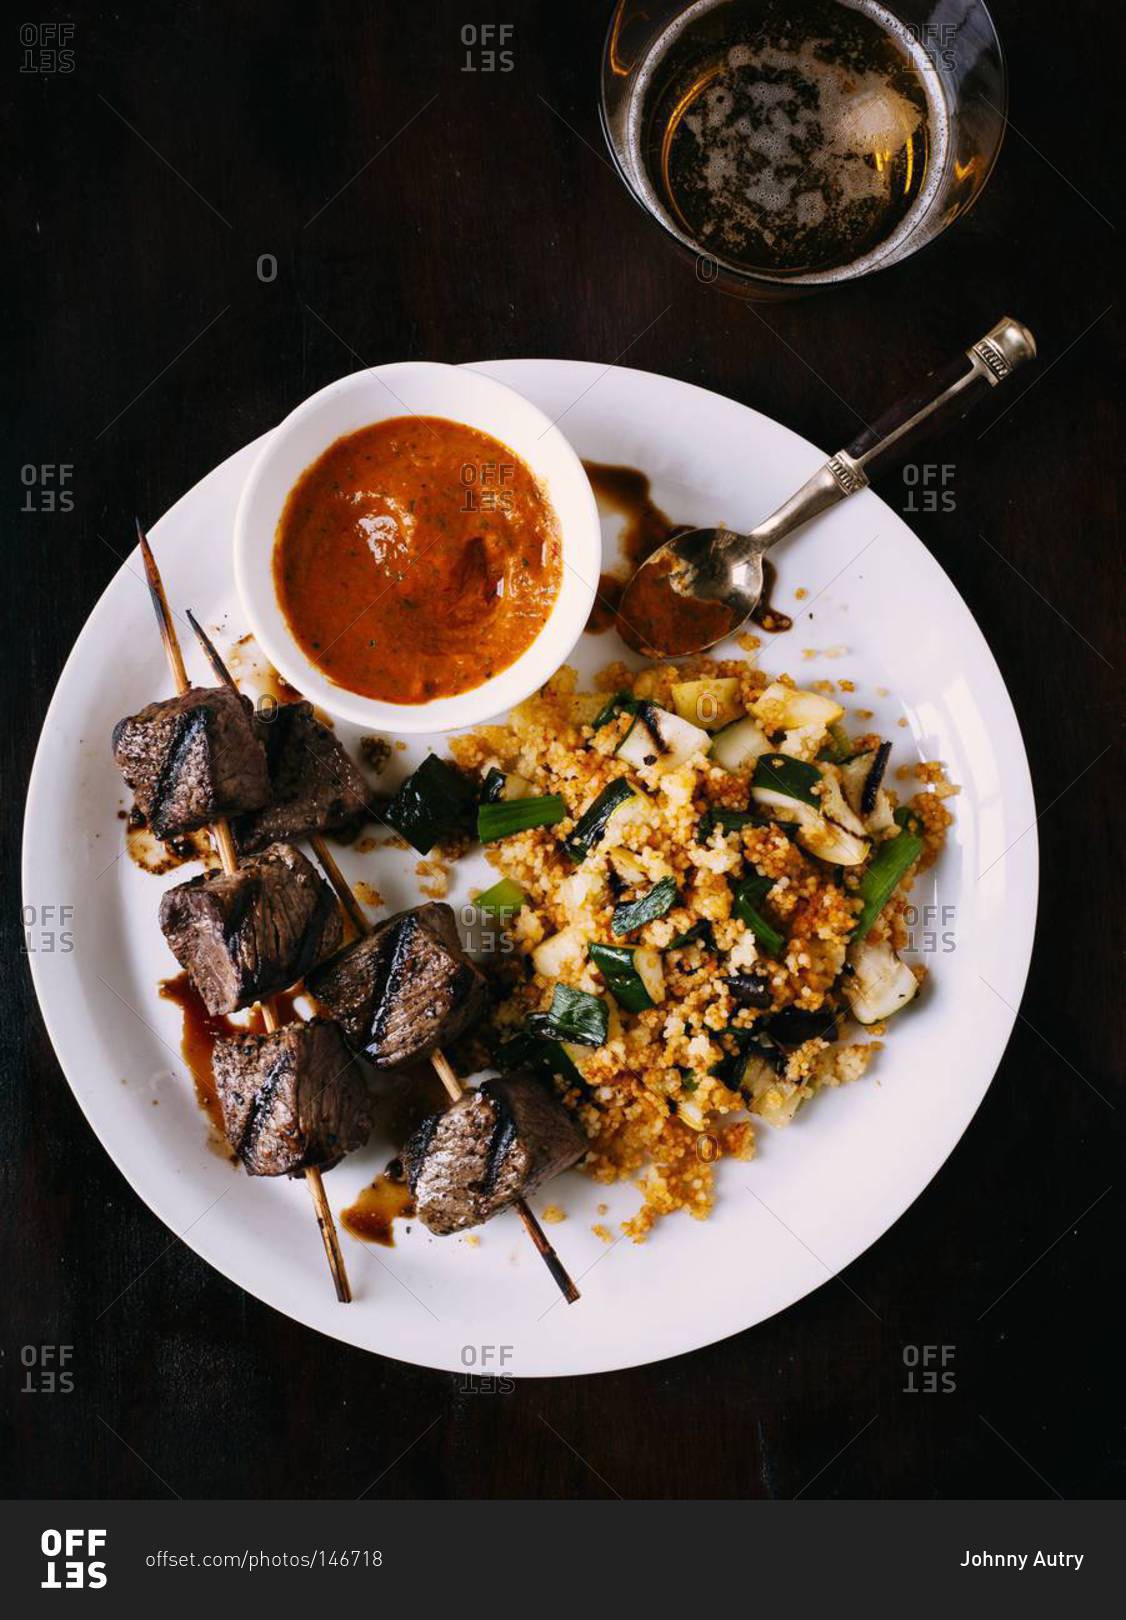 Grilled beef skewers with spicy dipping sauce, vegetable couscous seasoned with spices